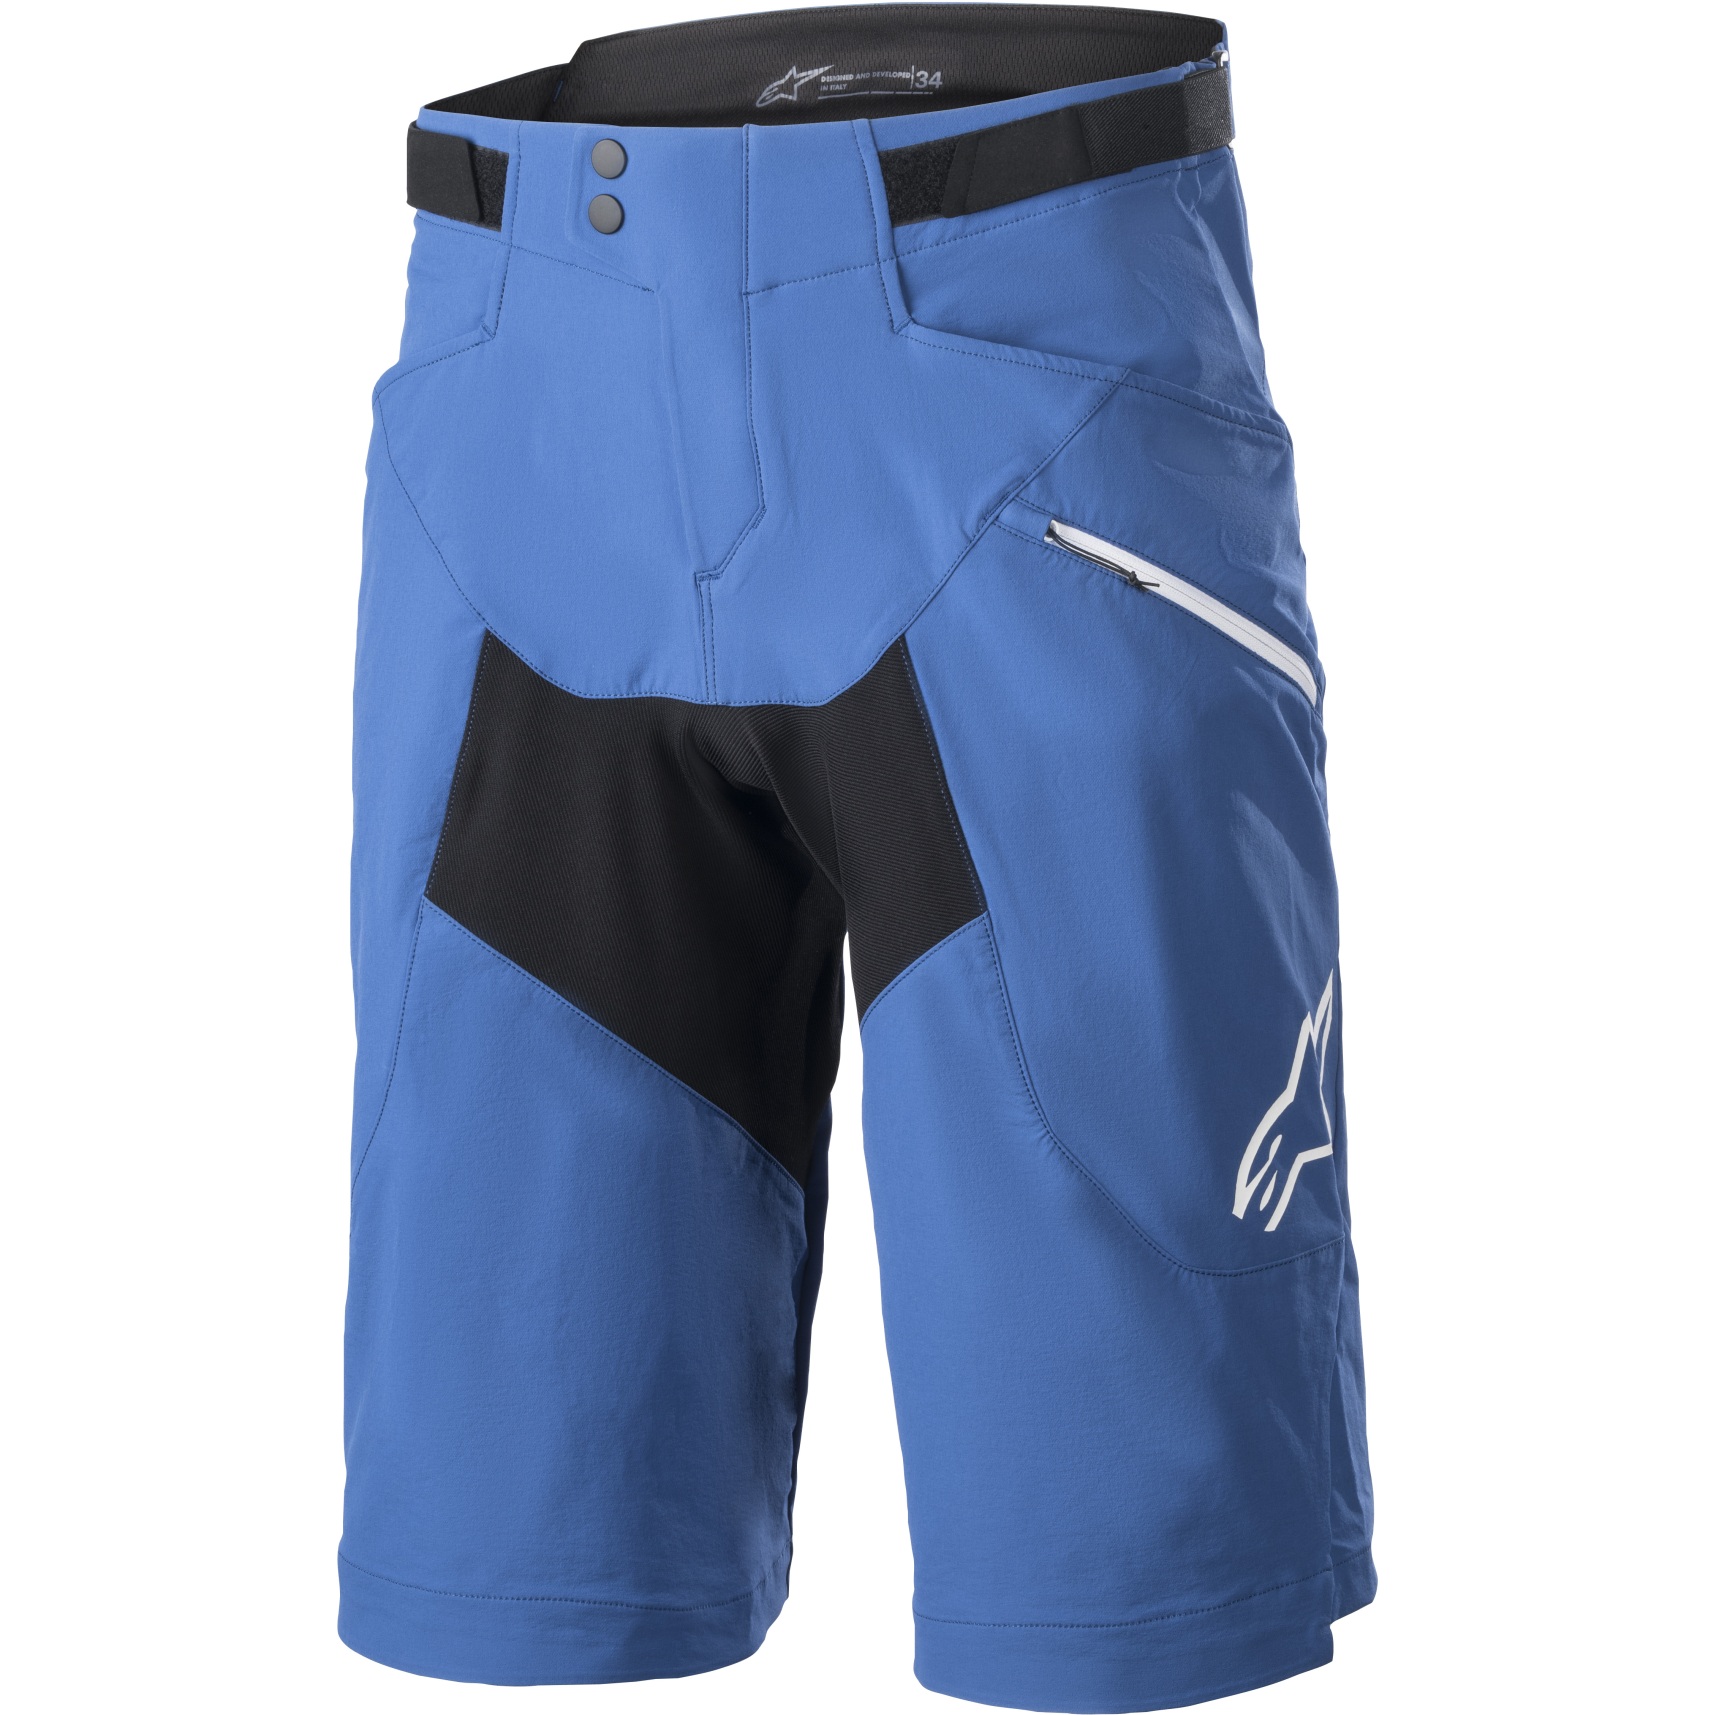 Picture of Alpinestars Drop 6.0 Shorts - mid blue